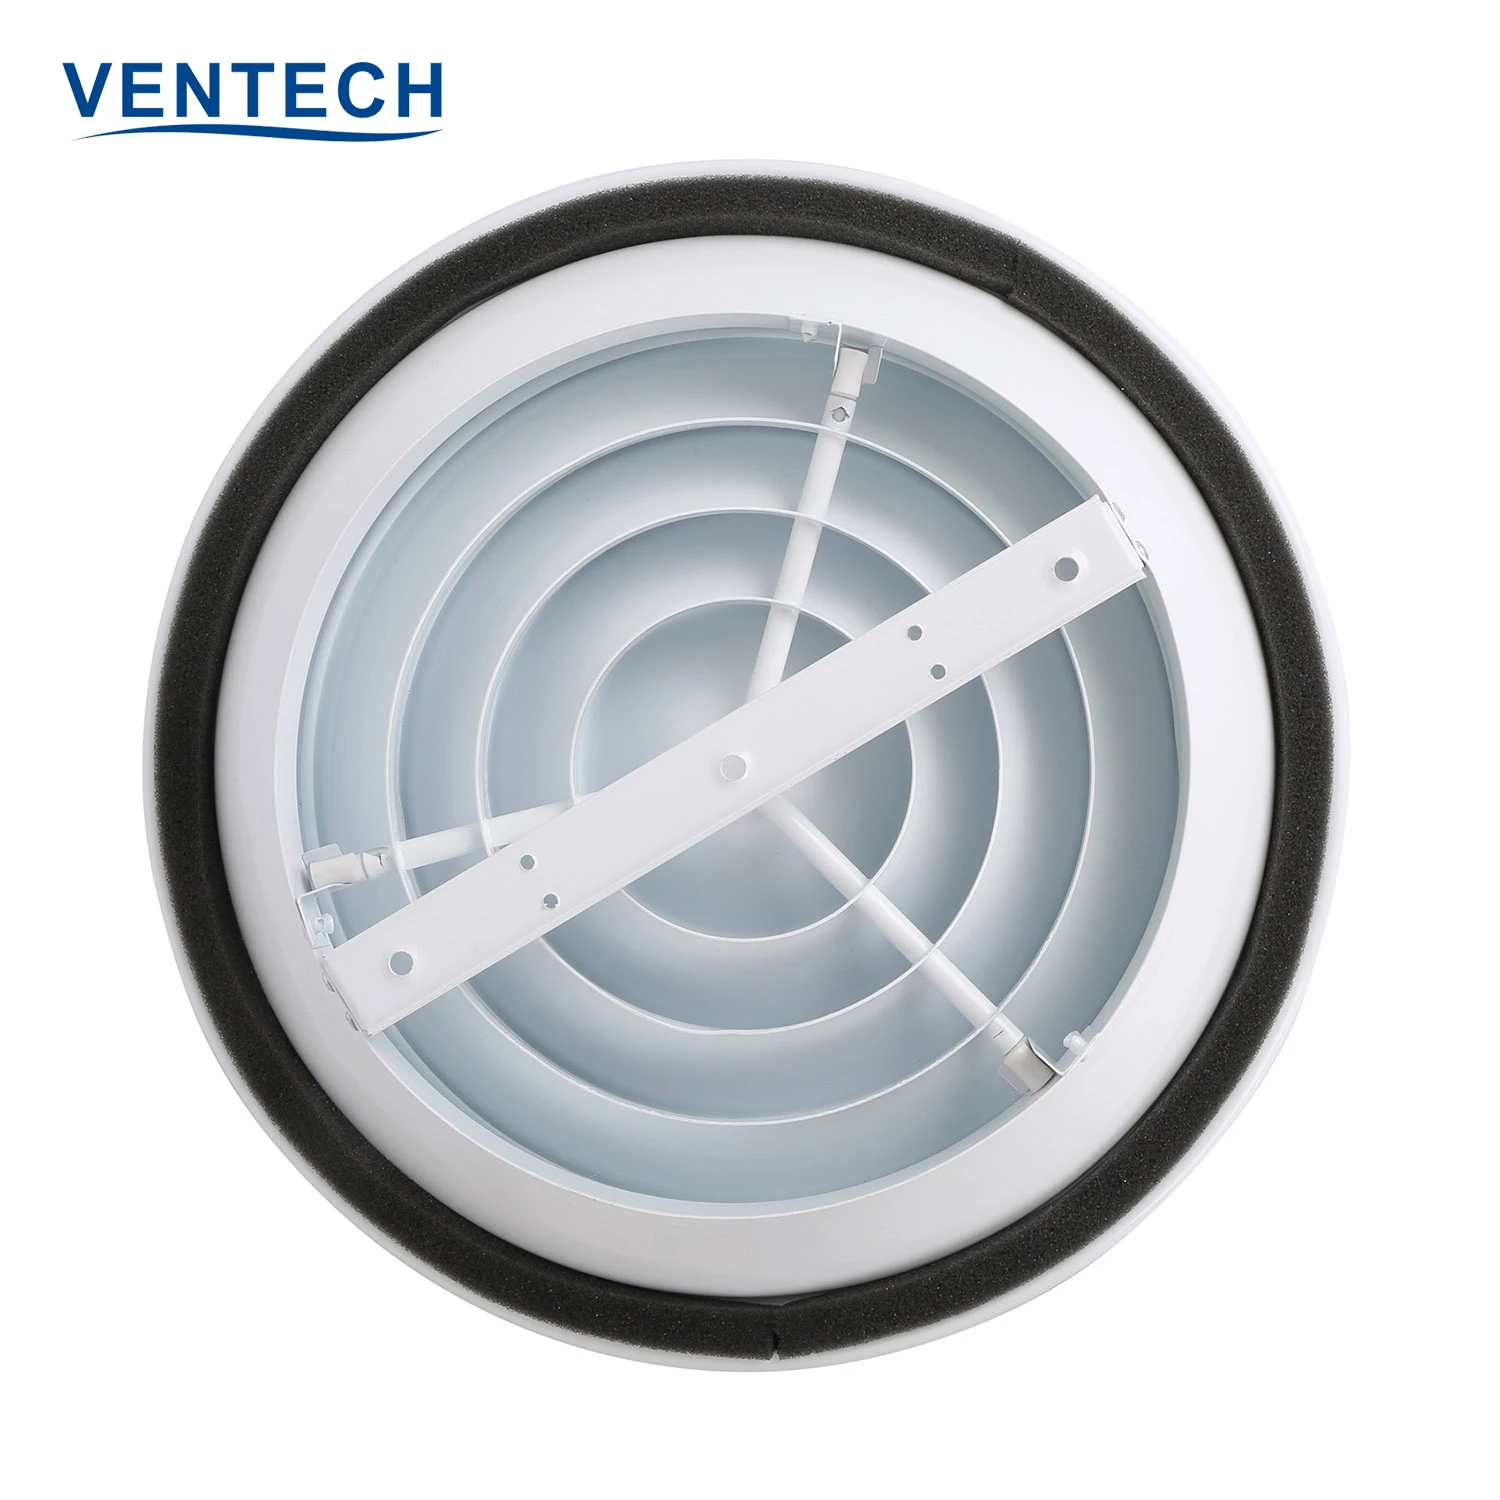 Hvac System Ac Conditioner Fan Covers Round Ceiling Air Vent Circular Diffuser Damper For Ventilation